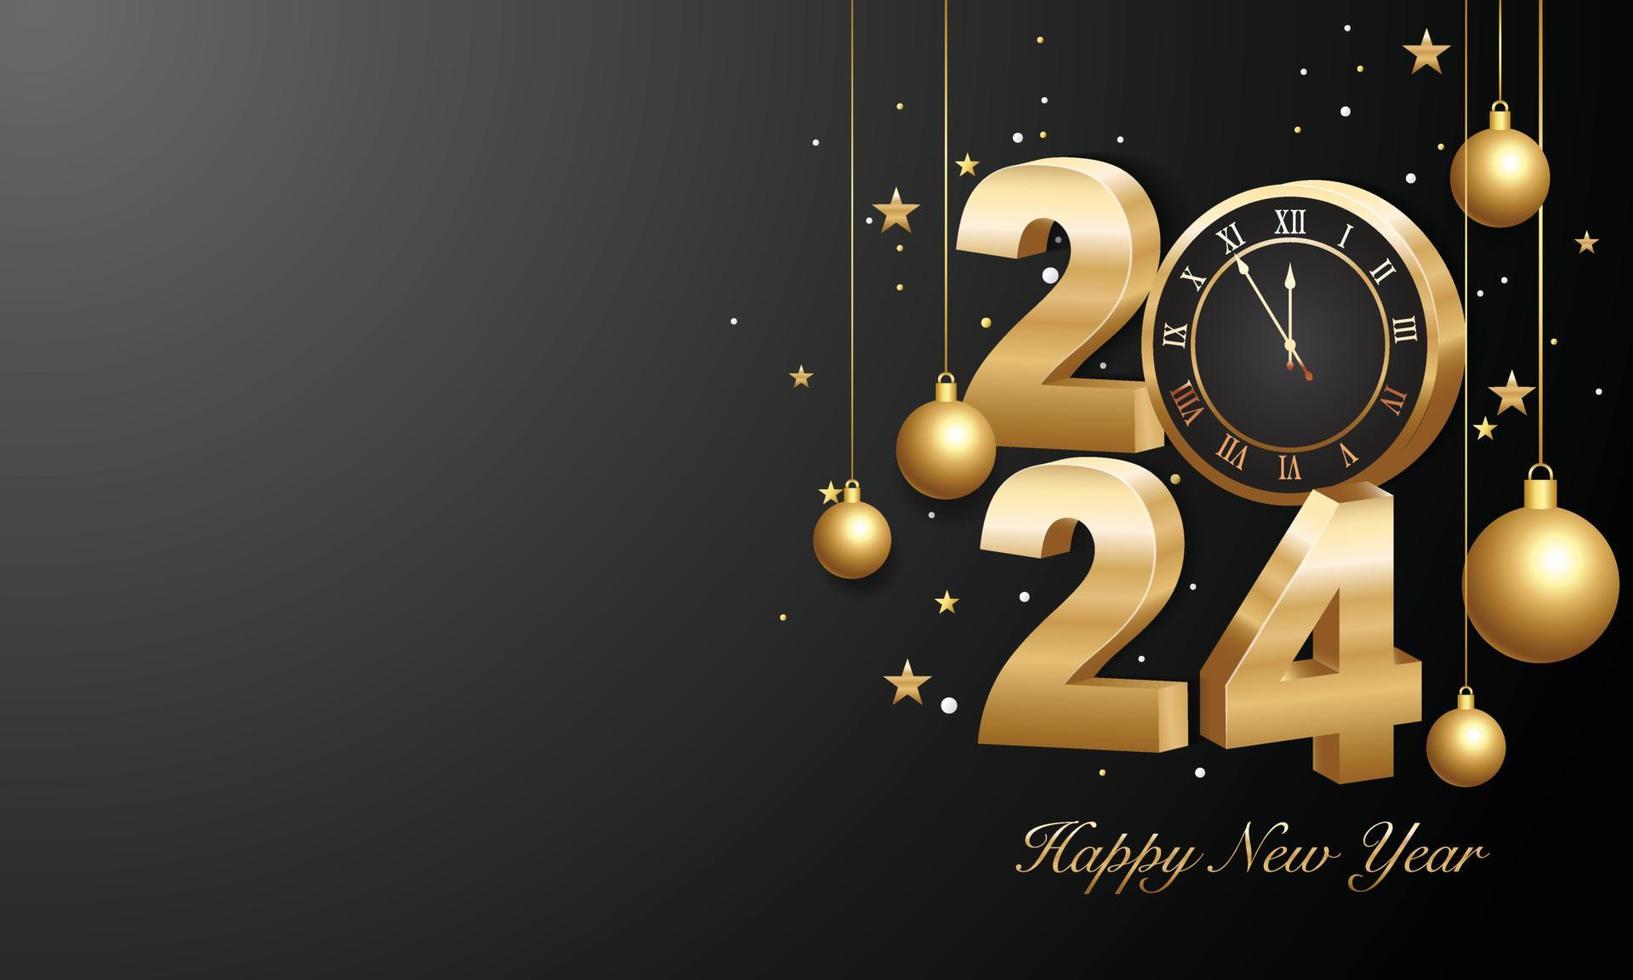 10 fun and exciting ways to celebrate New Year’s Eve at home to ring in 2024